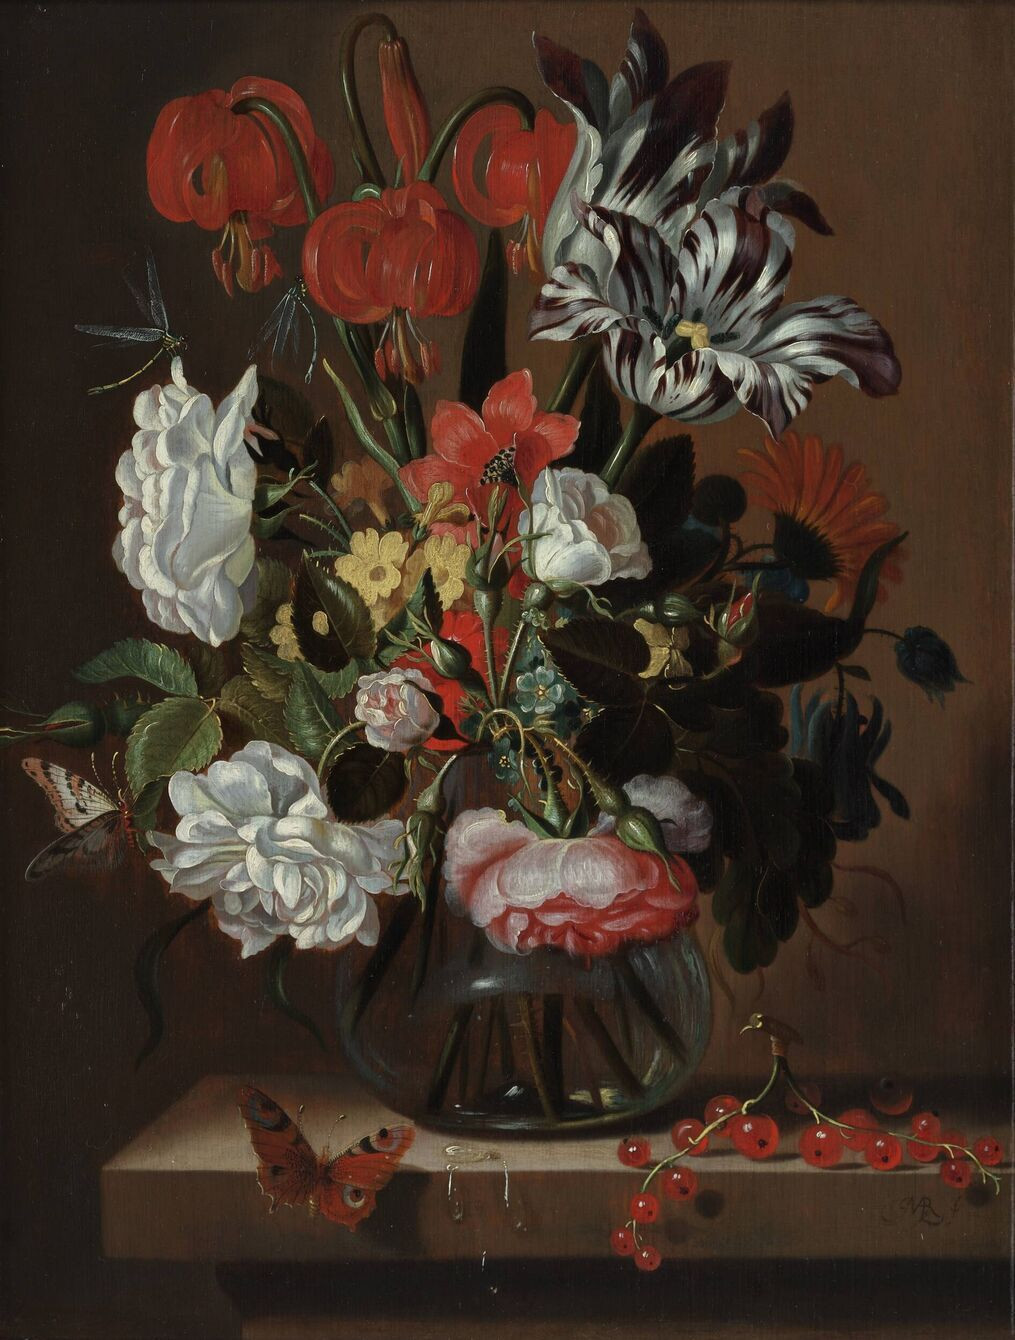 still life flowers in a vase of ddnndµn nd²dµnd¾nd½d¾d³d¾ d½dnnnd¼d¾nnd d¯dod with ddnndµn nd²dµnd¾nd½d¾d³d¾ d½dnnnd¼d¾nnd d¯dod